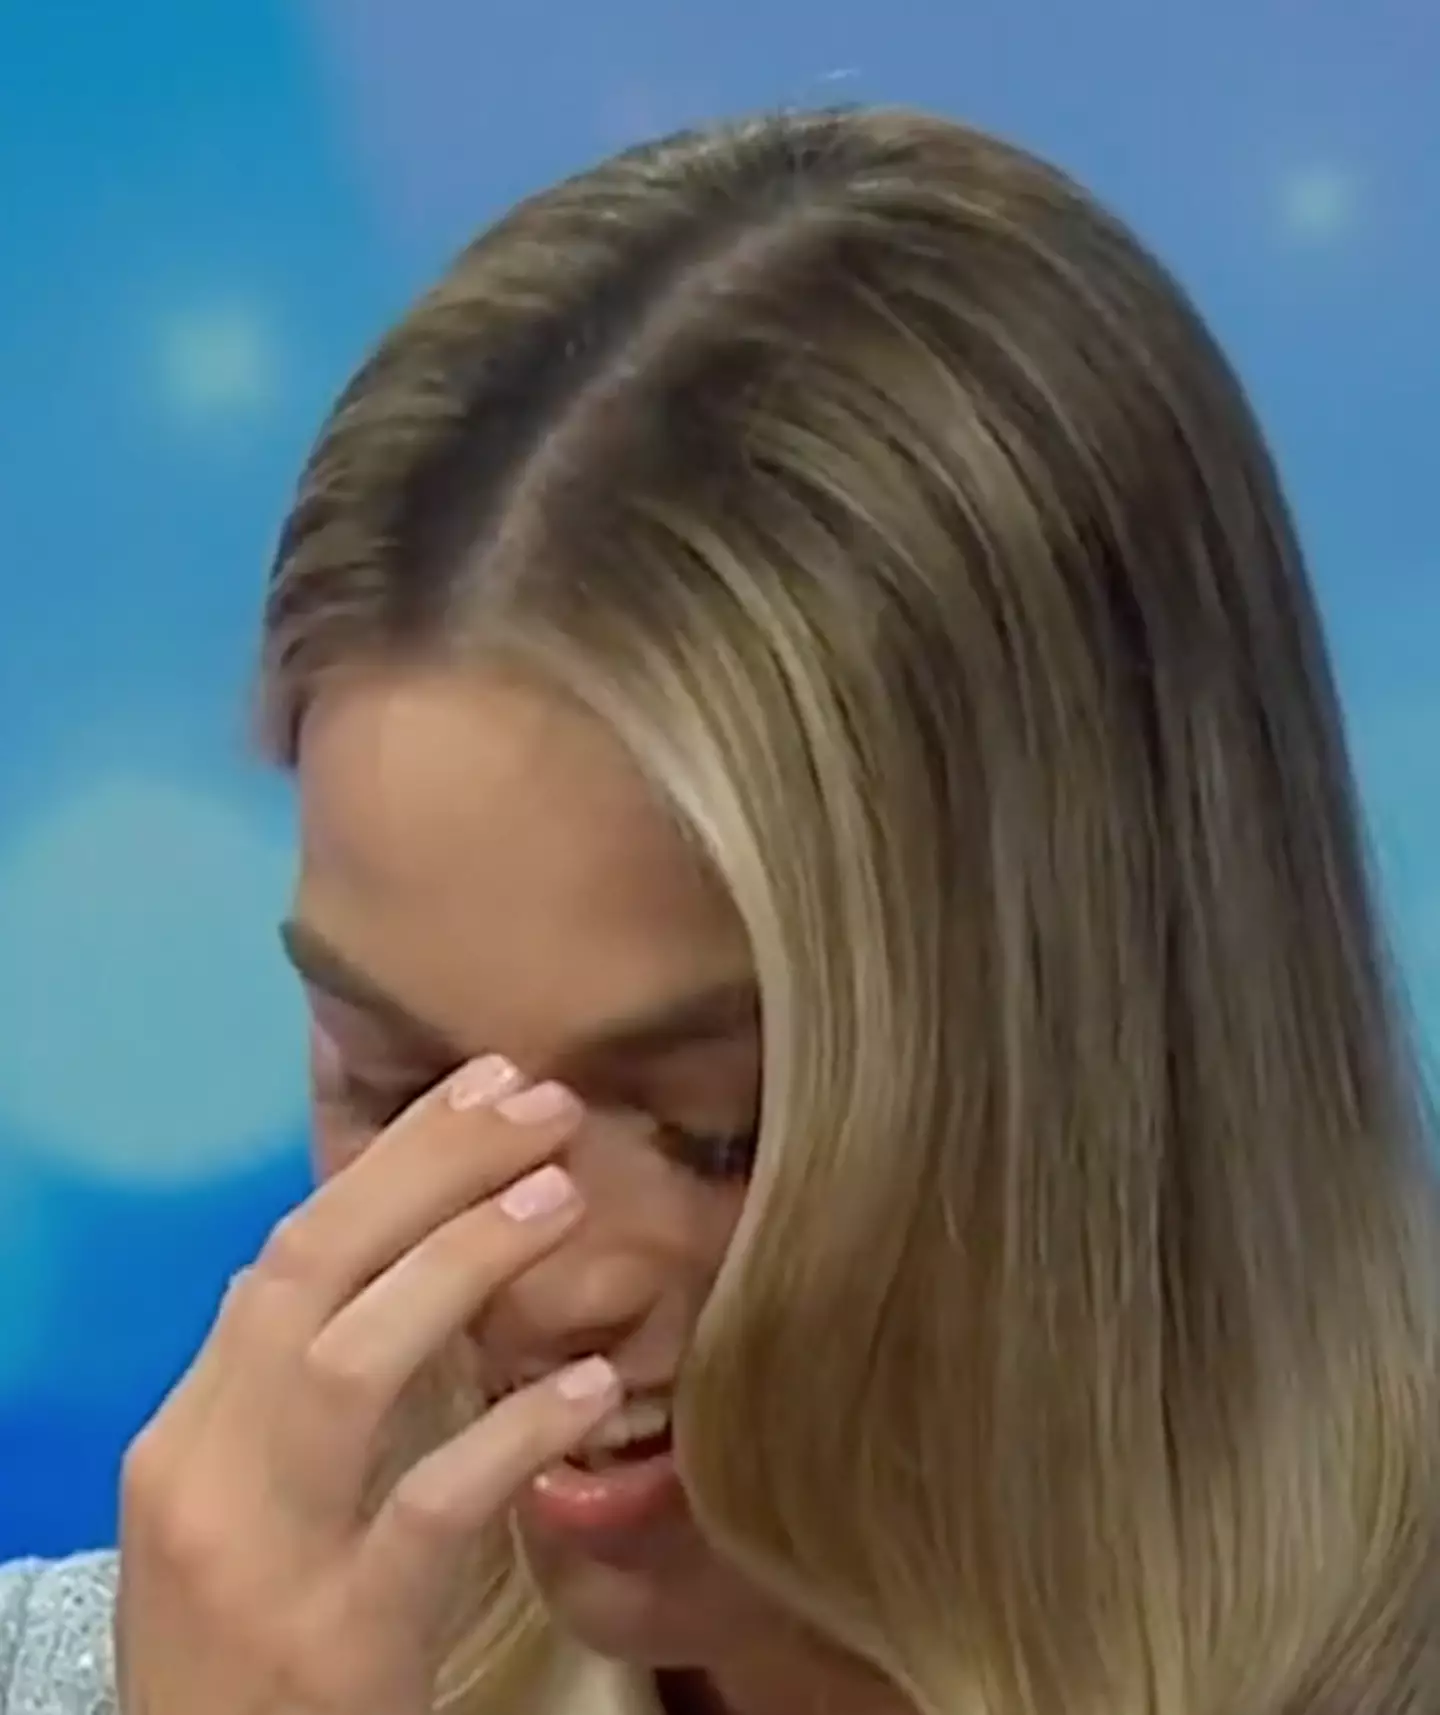 She couldn't help but hold her head in her hands after the hilarious blunder.